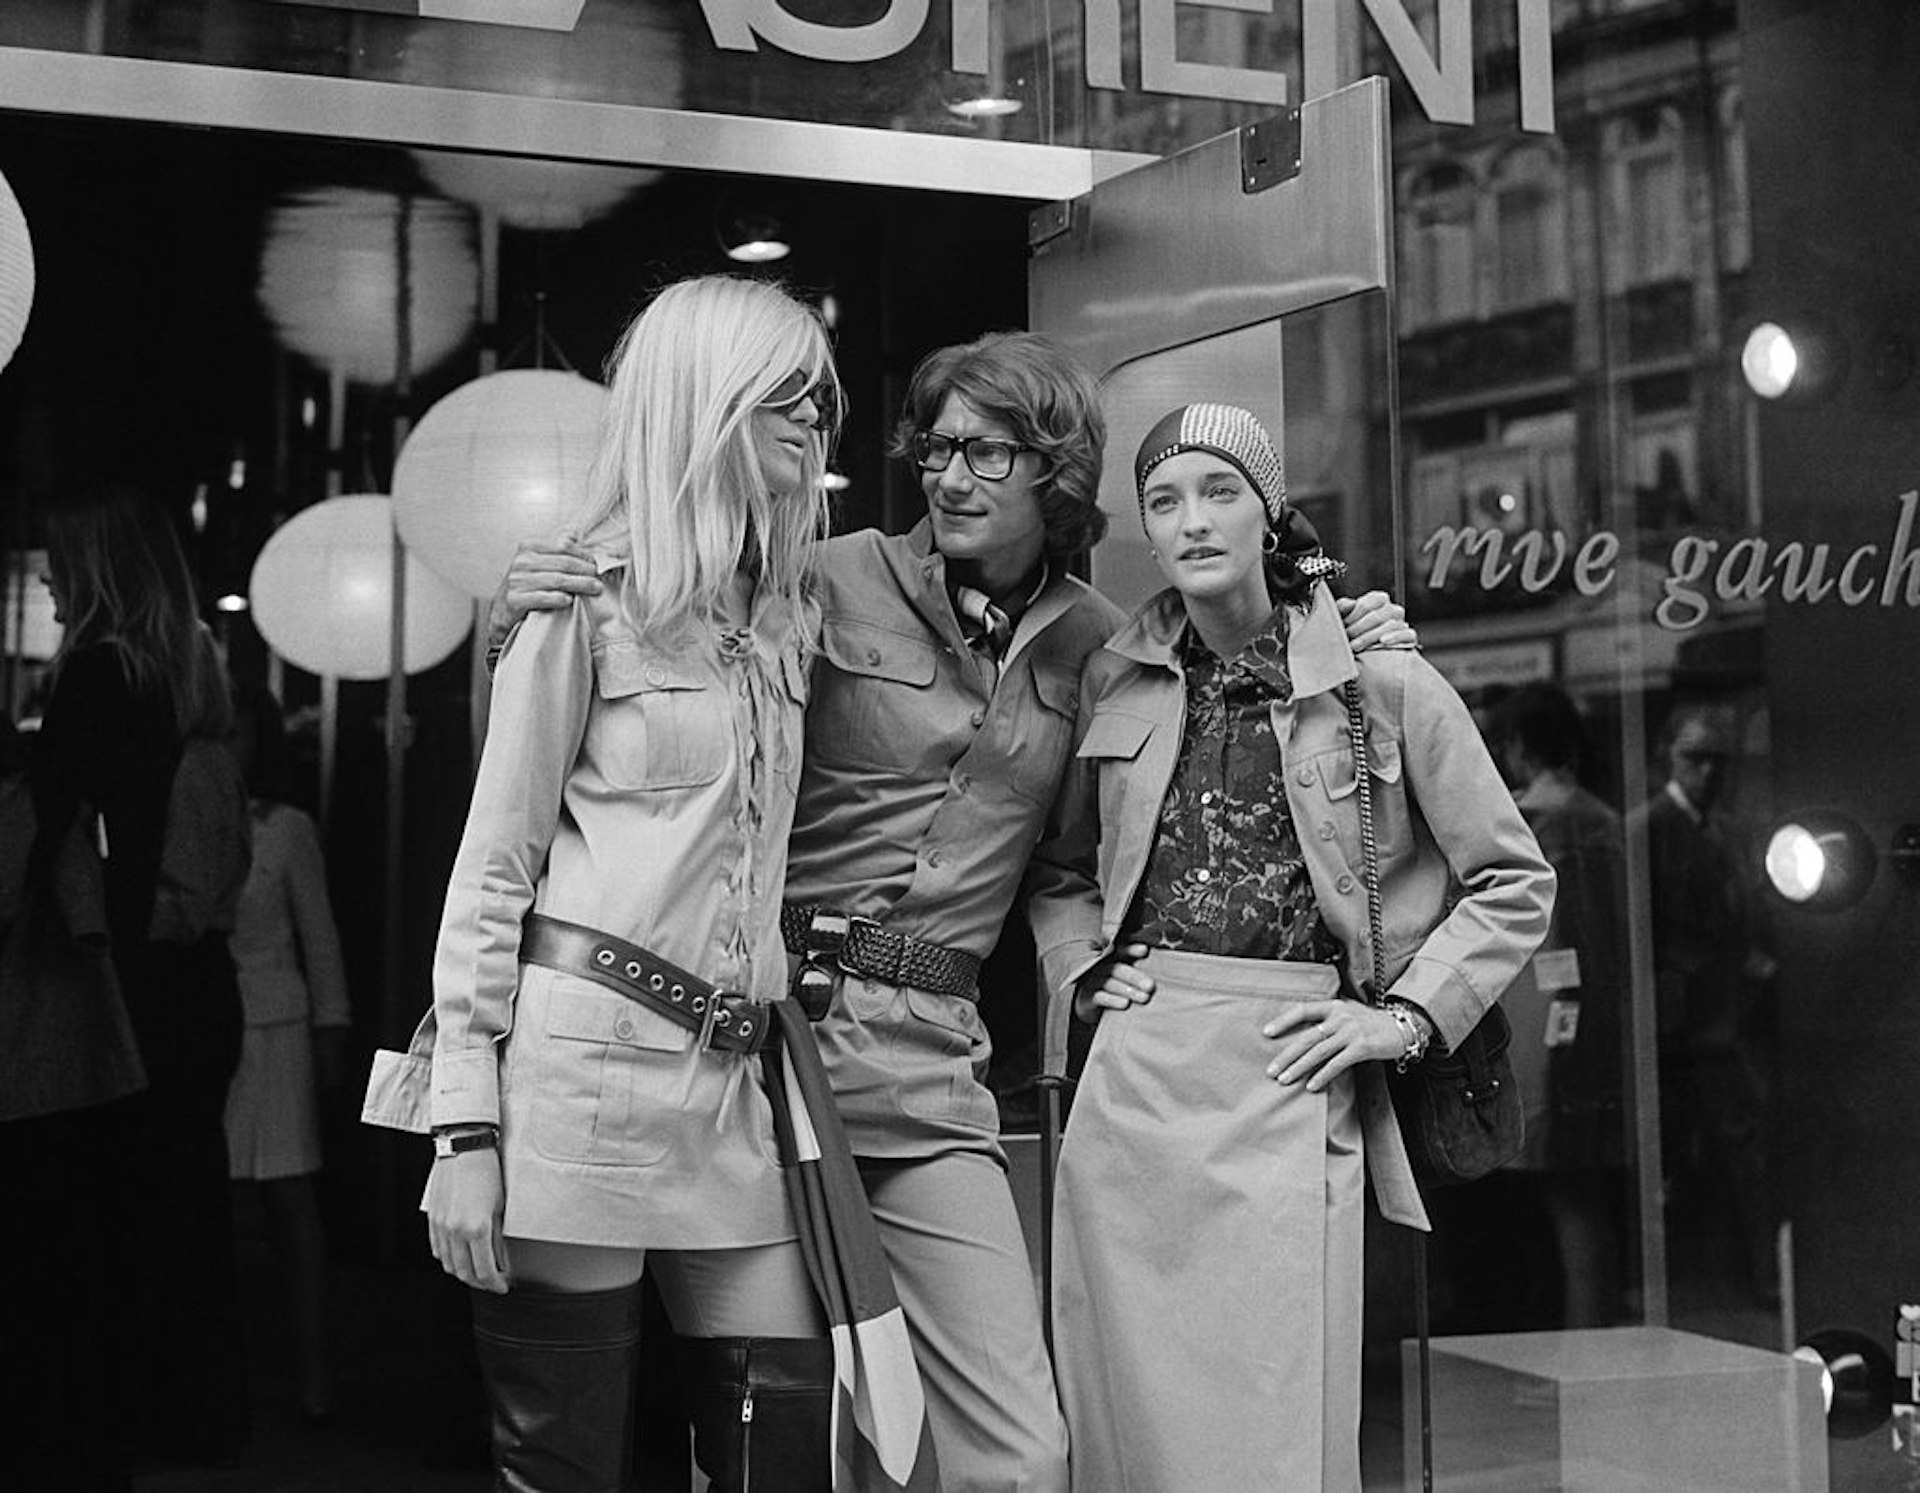 Yves Saint Laurent, French designer with two fashion models, Betty Catroux (left) and Loulou de la Falaise